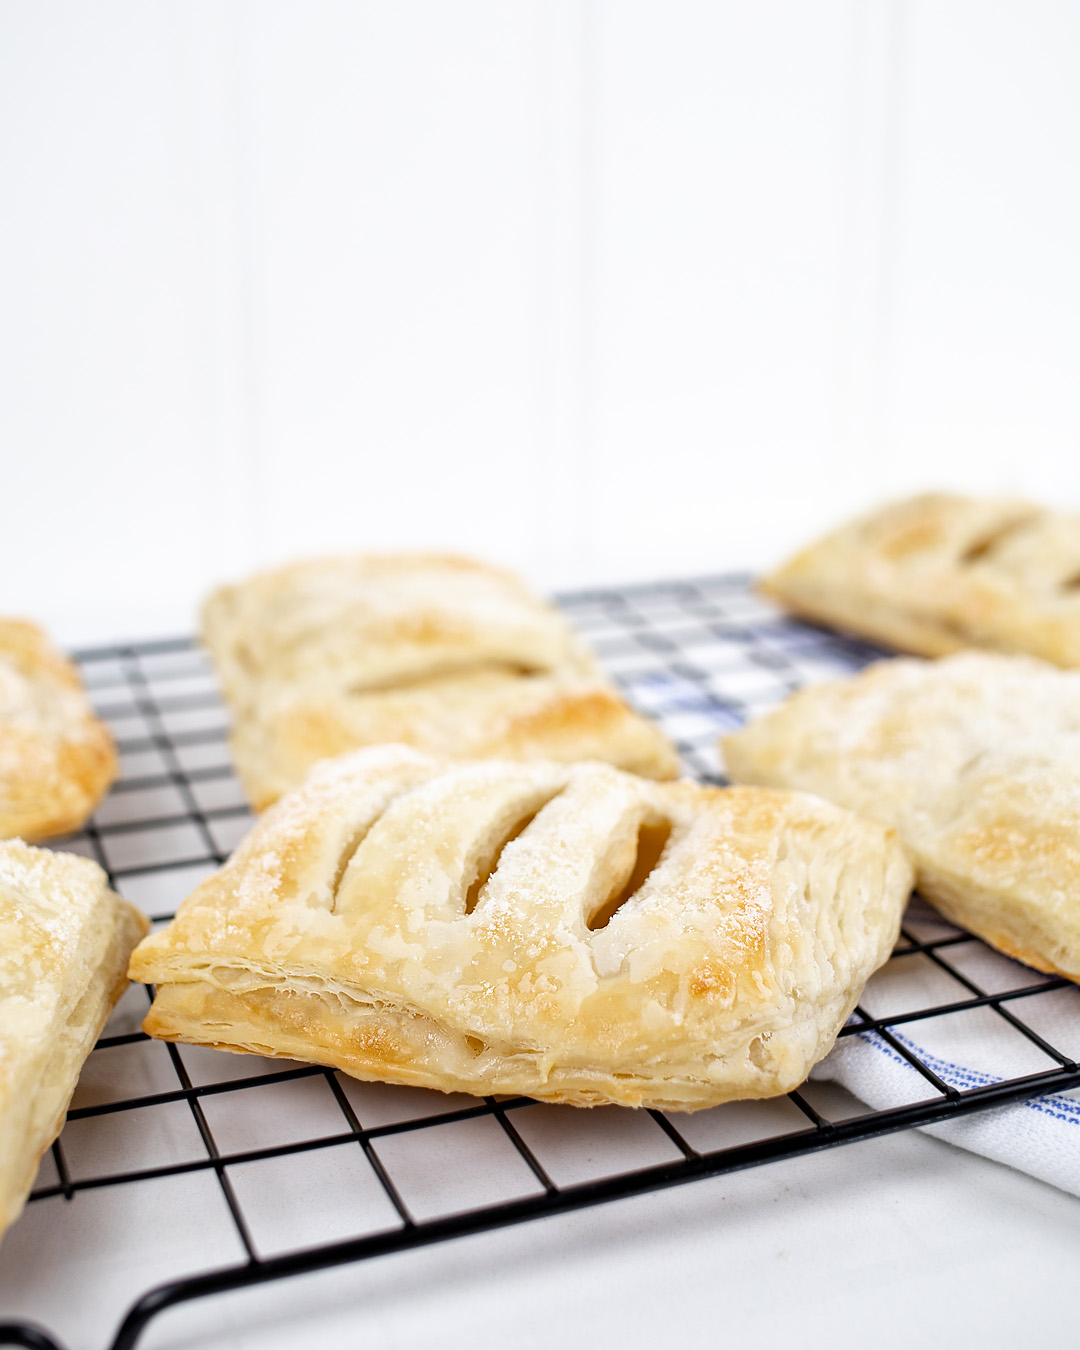 Try this three ingredient apple danish recipe this fall after you get back from the orchard! It's the perfect easy baking recipe to use for all those fall apples!